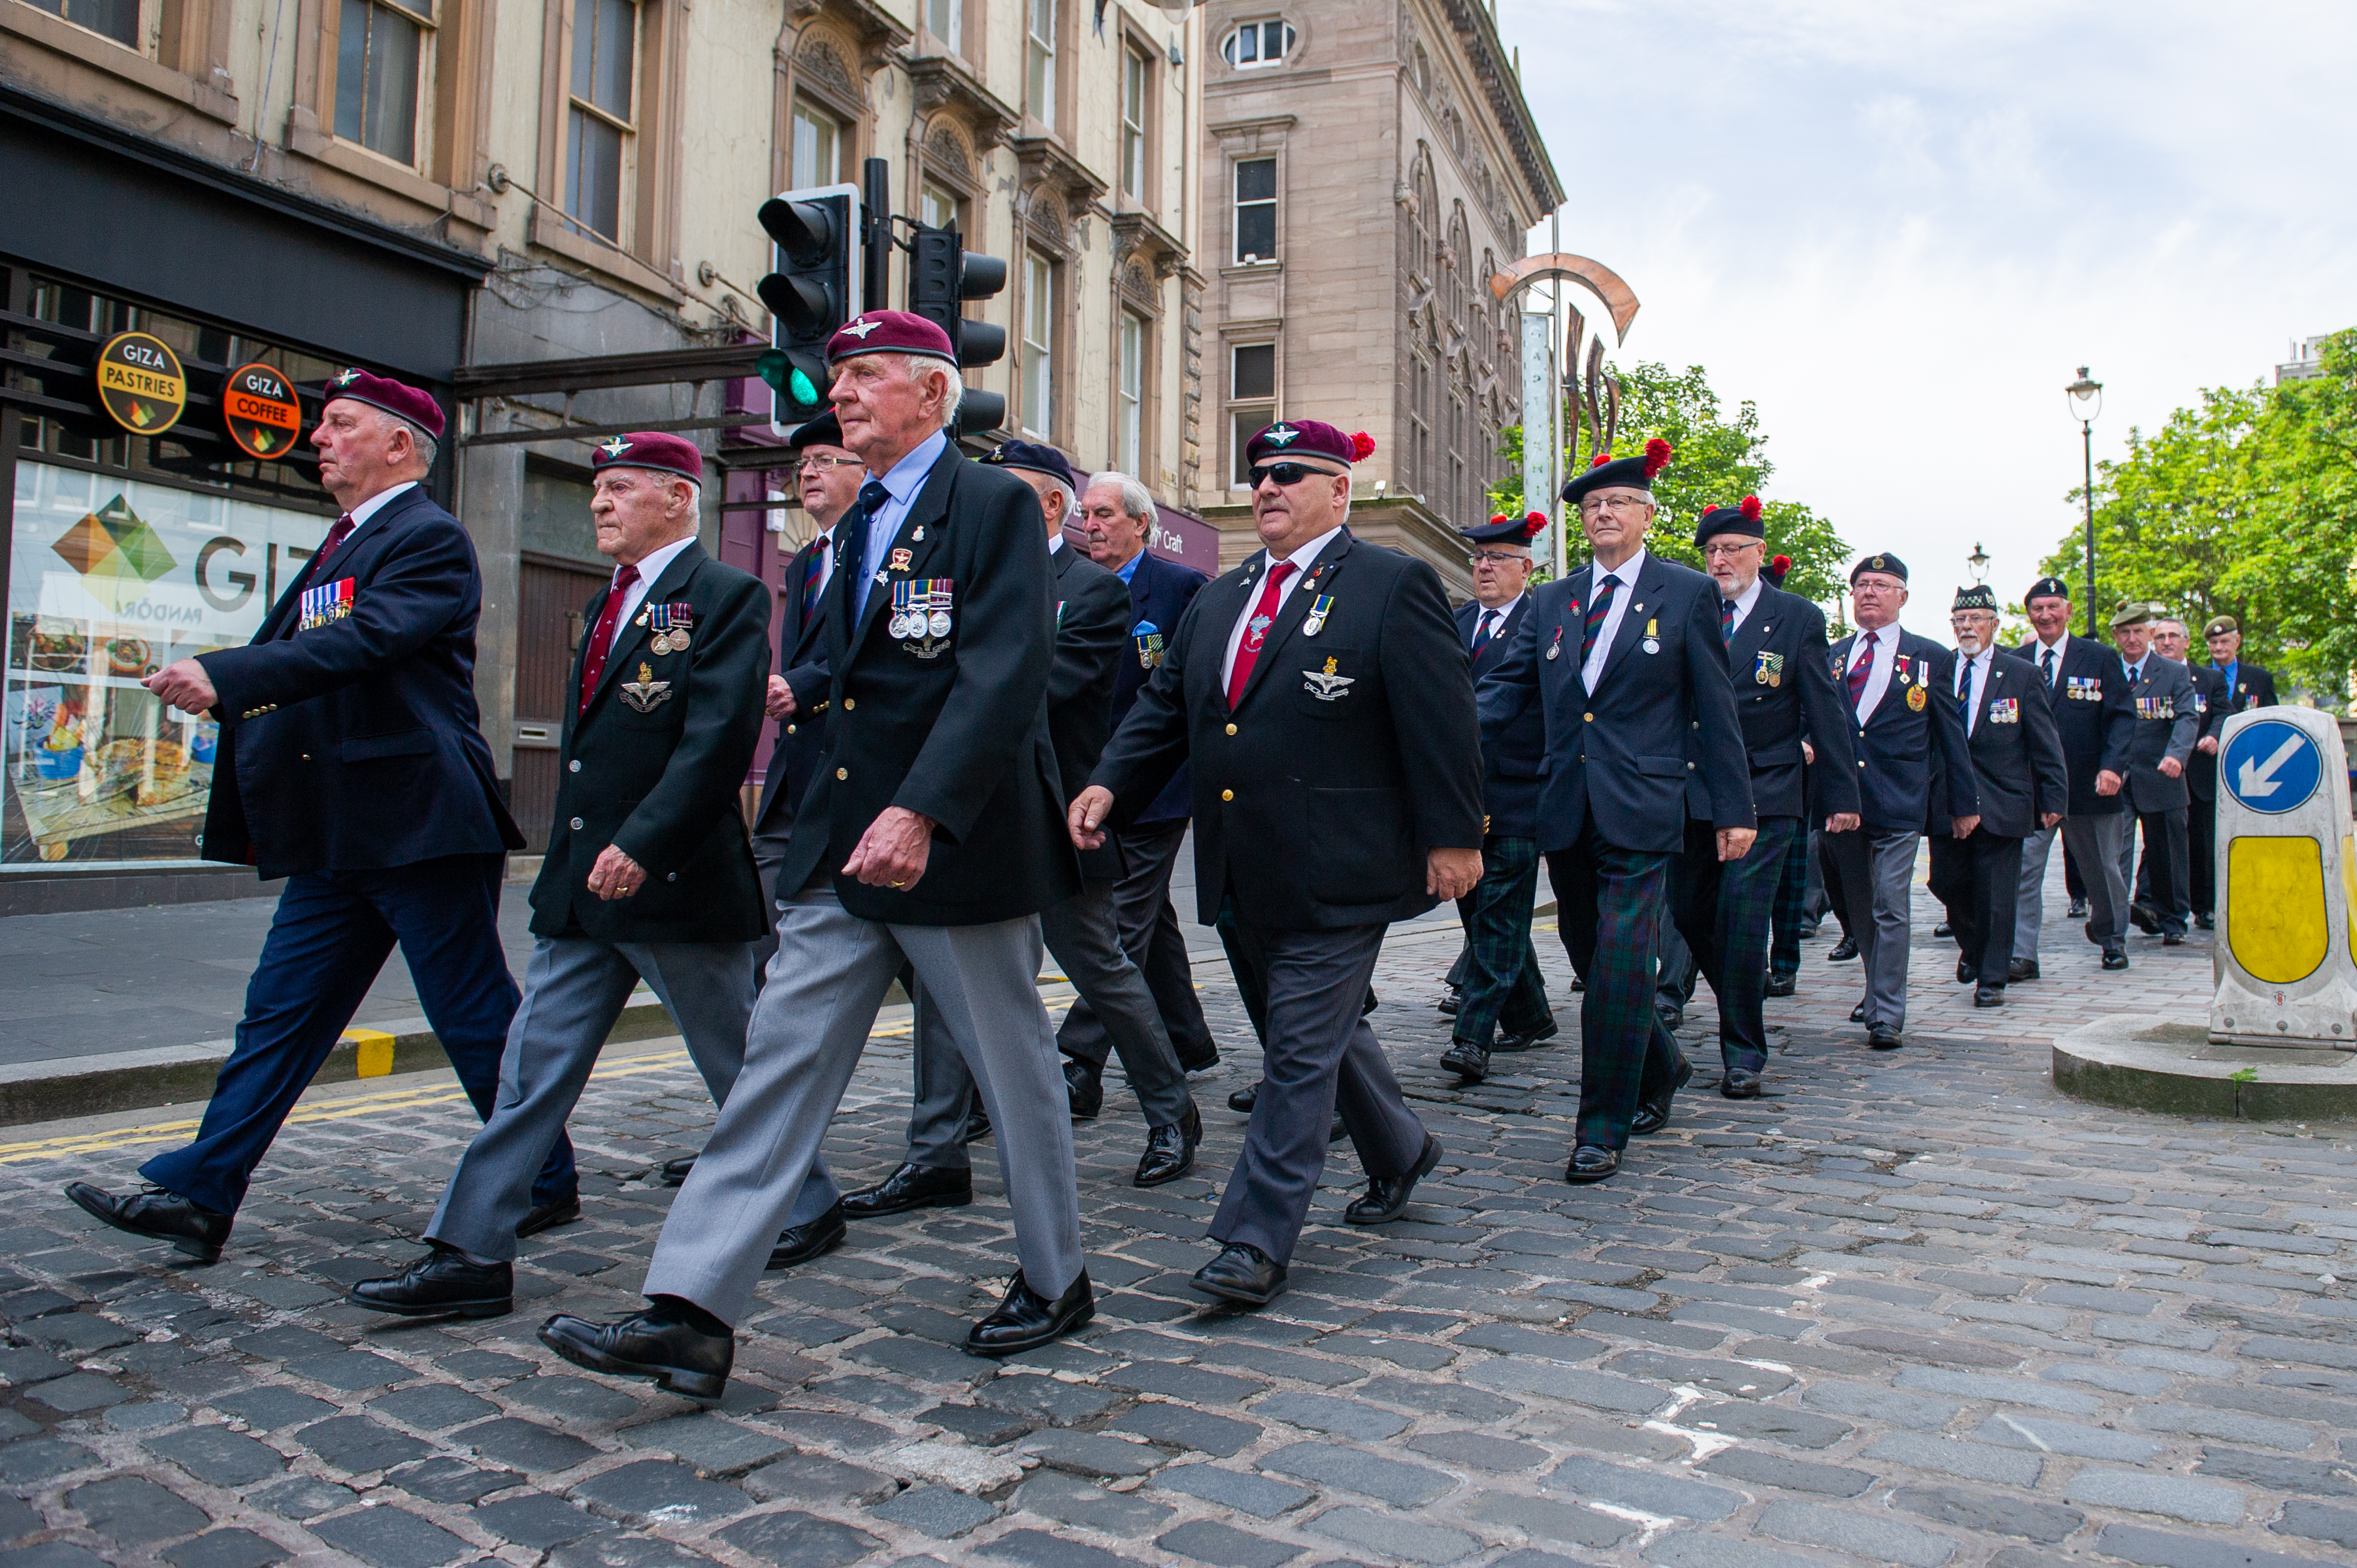 Veterans take part in the Armed Forces Day Parade